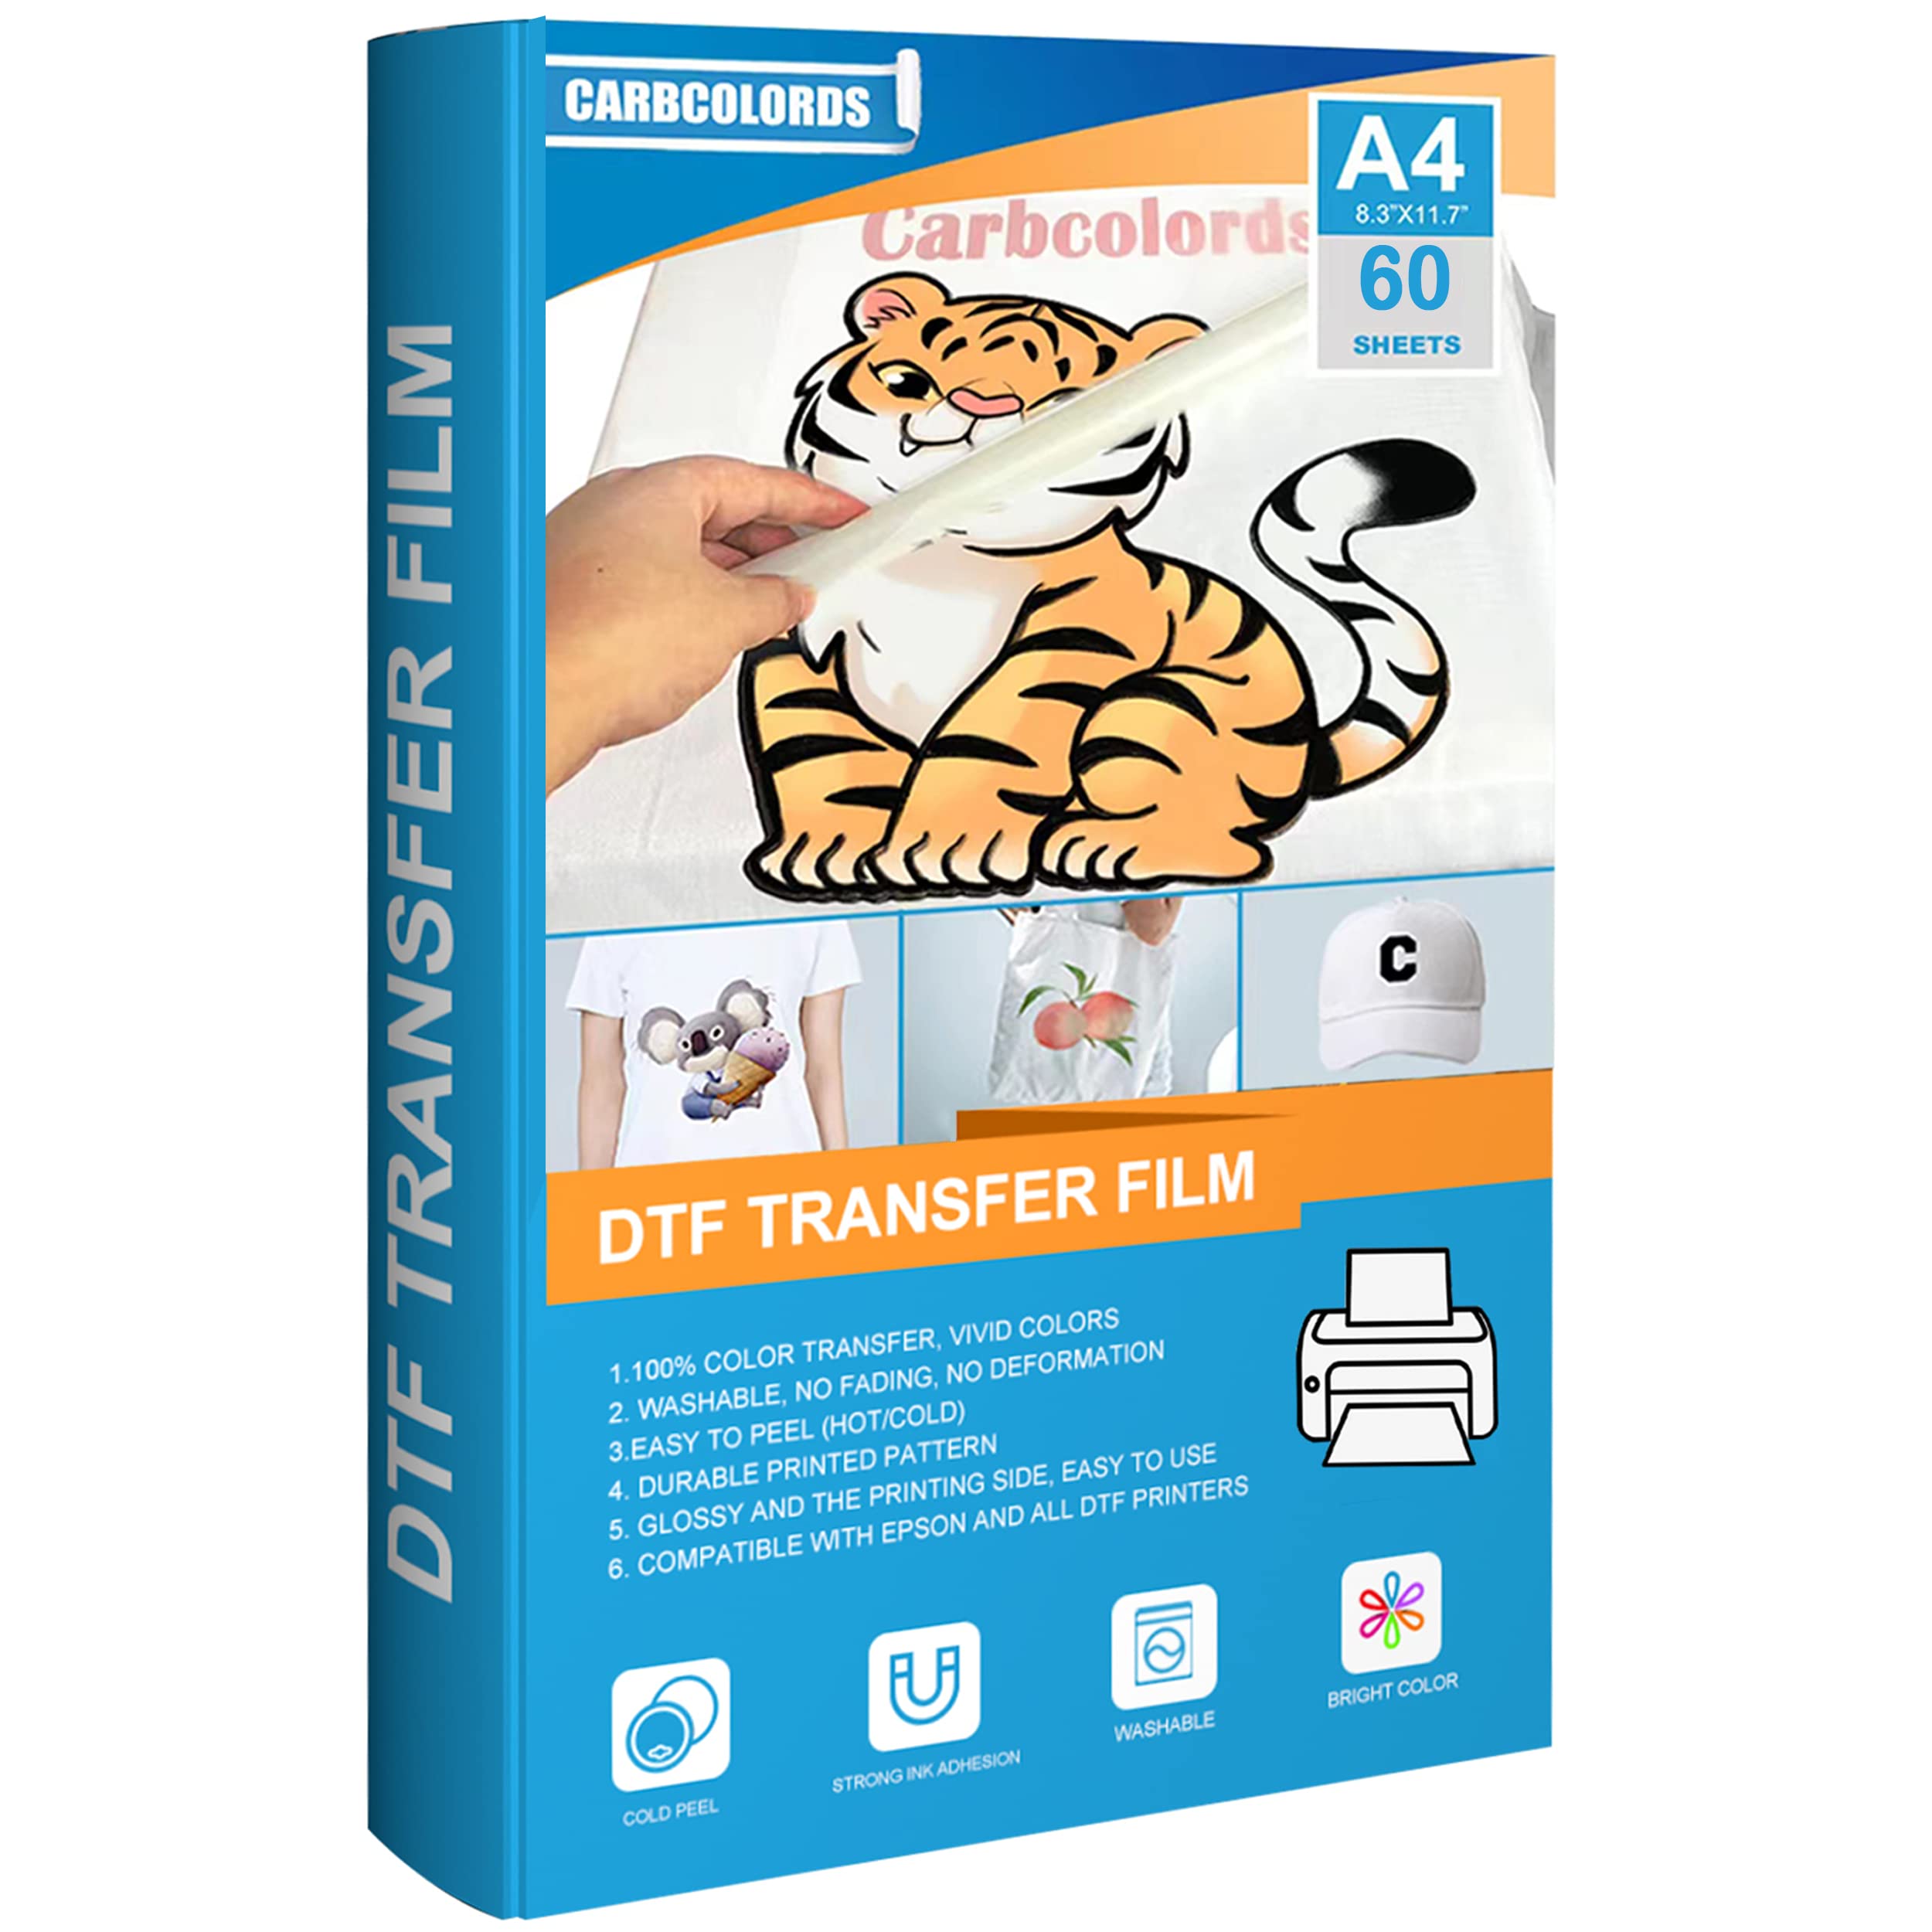 Carbcolords DTF Transfer Film-60 Sheets A4(8.3 x 11.7) PET Clear